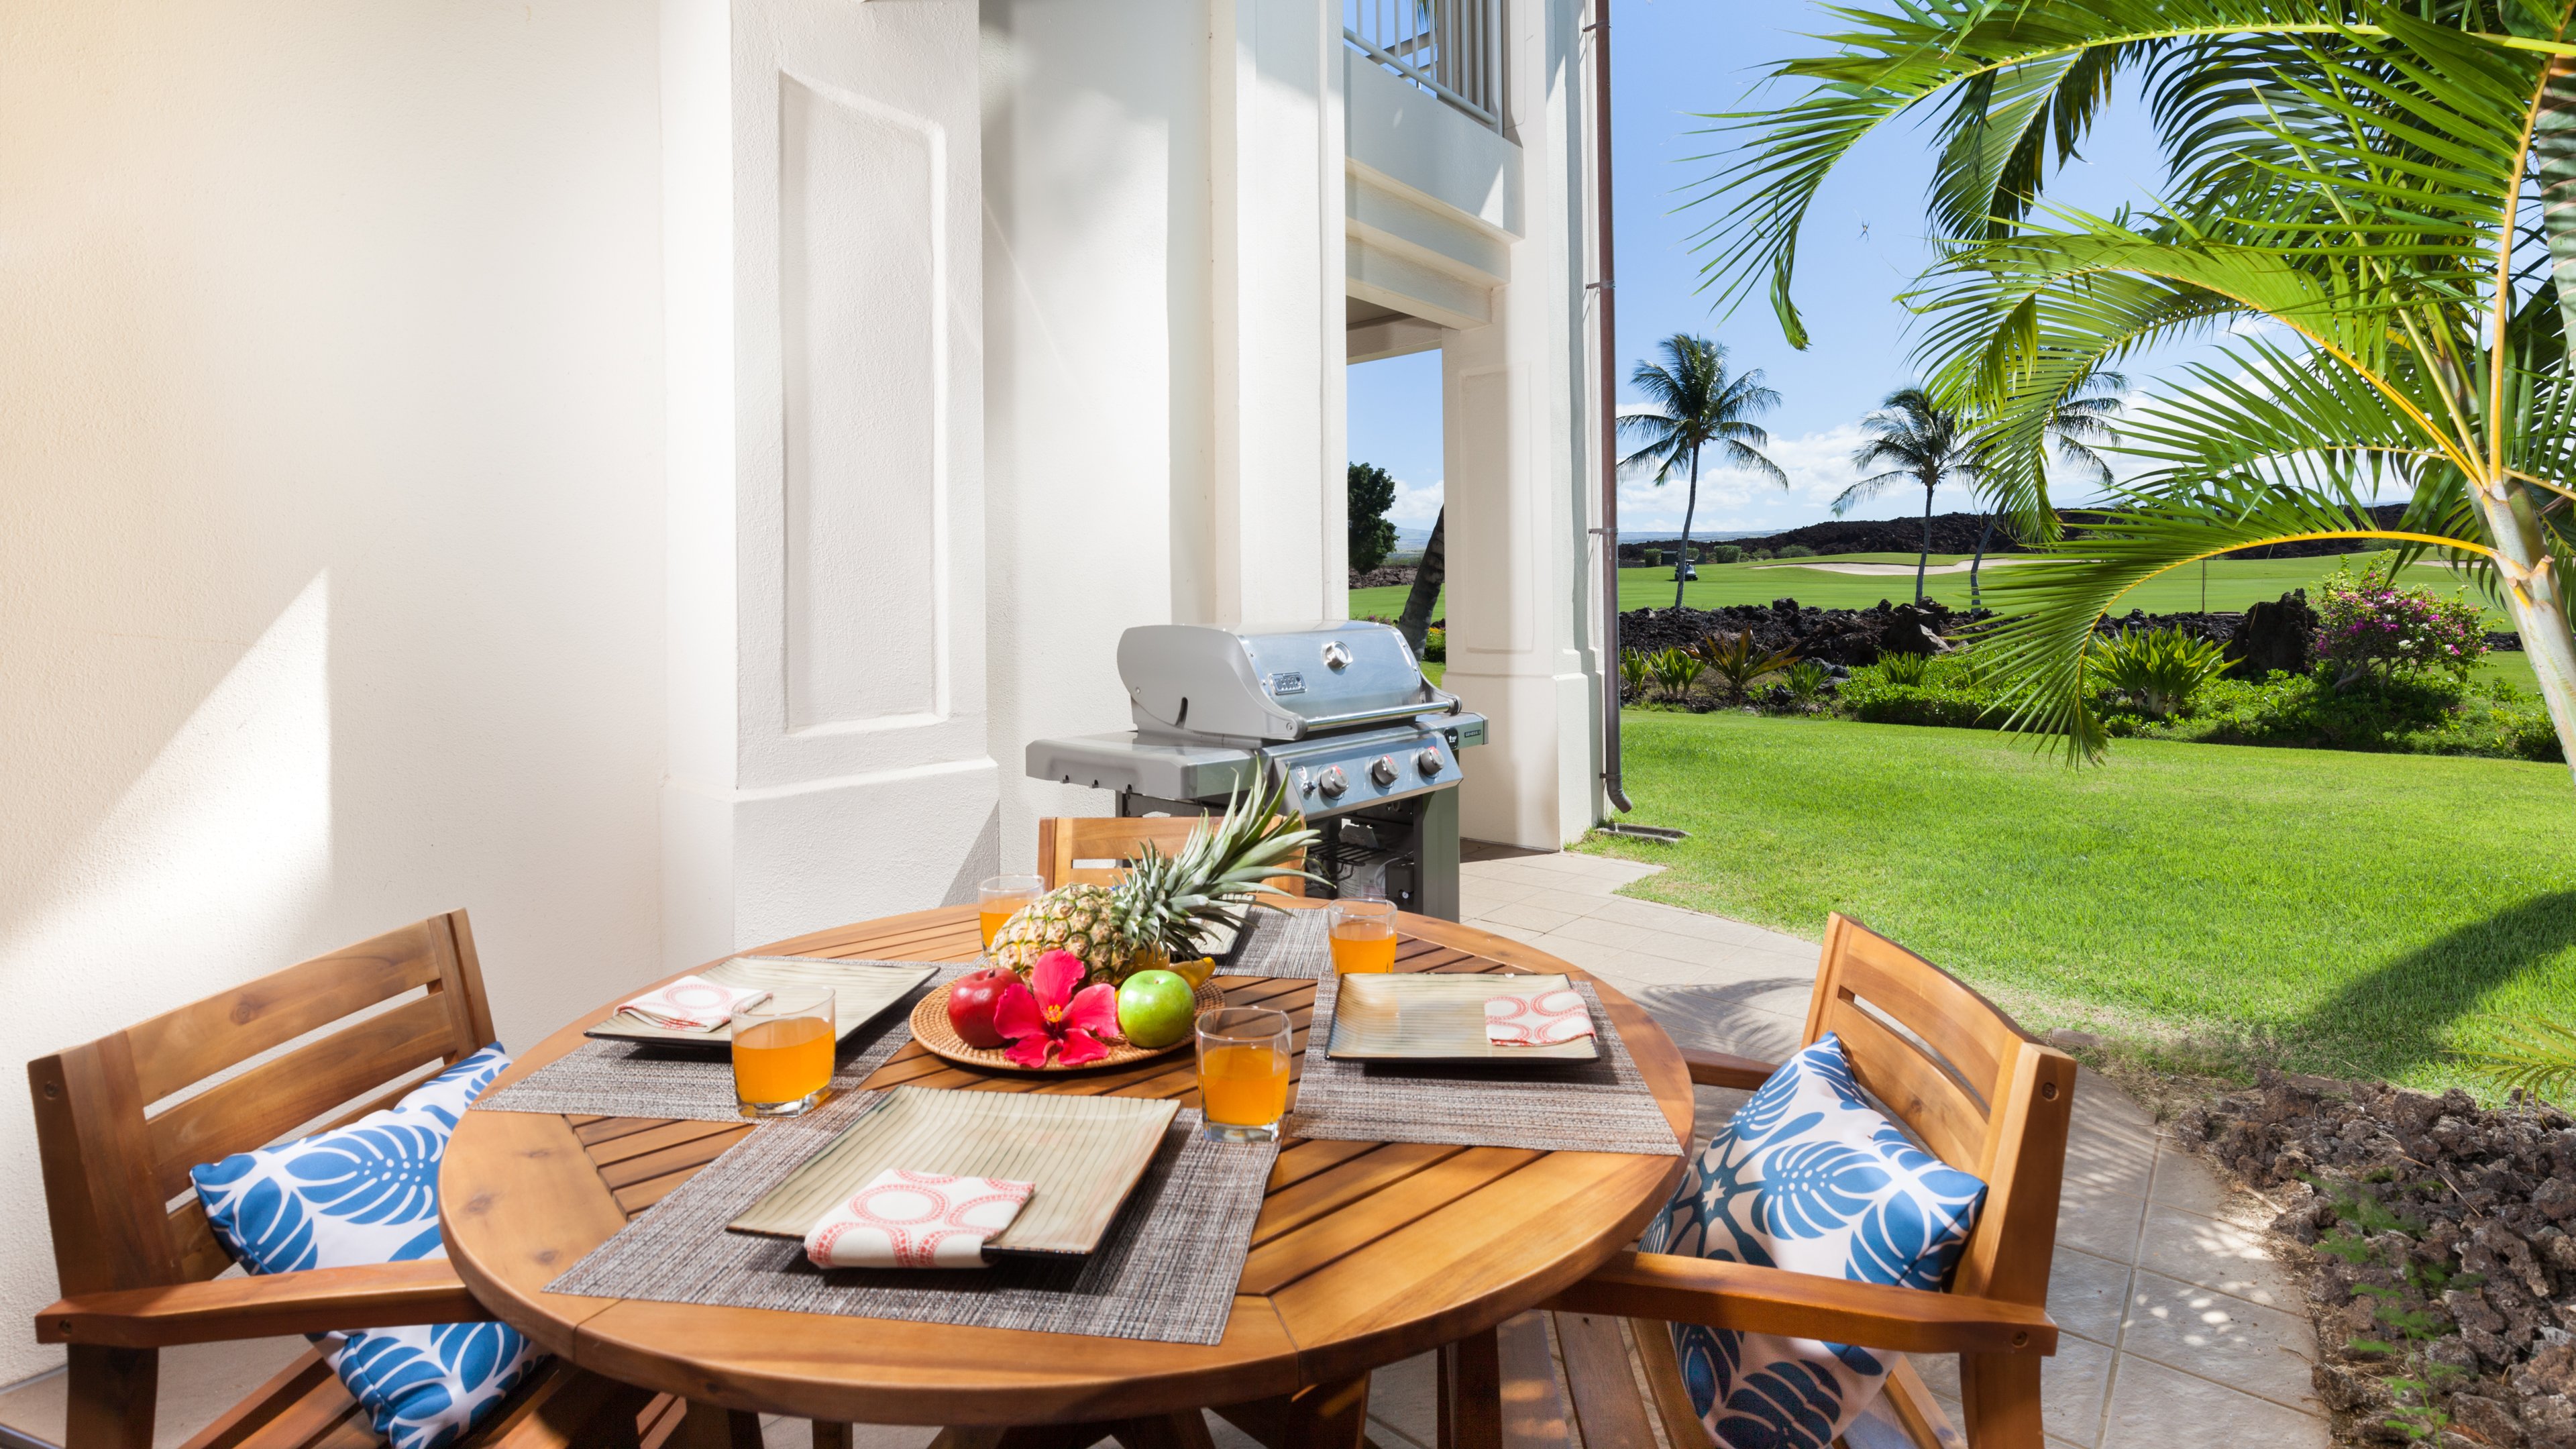 Welcome to Island Song Villa in the islands community in Mauna Lani